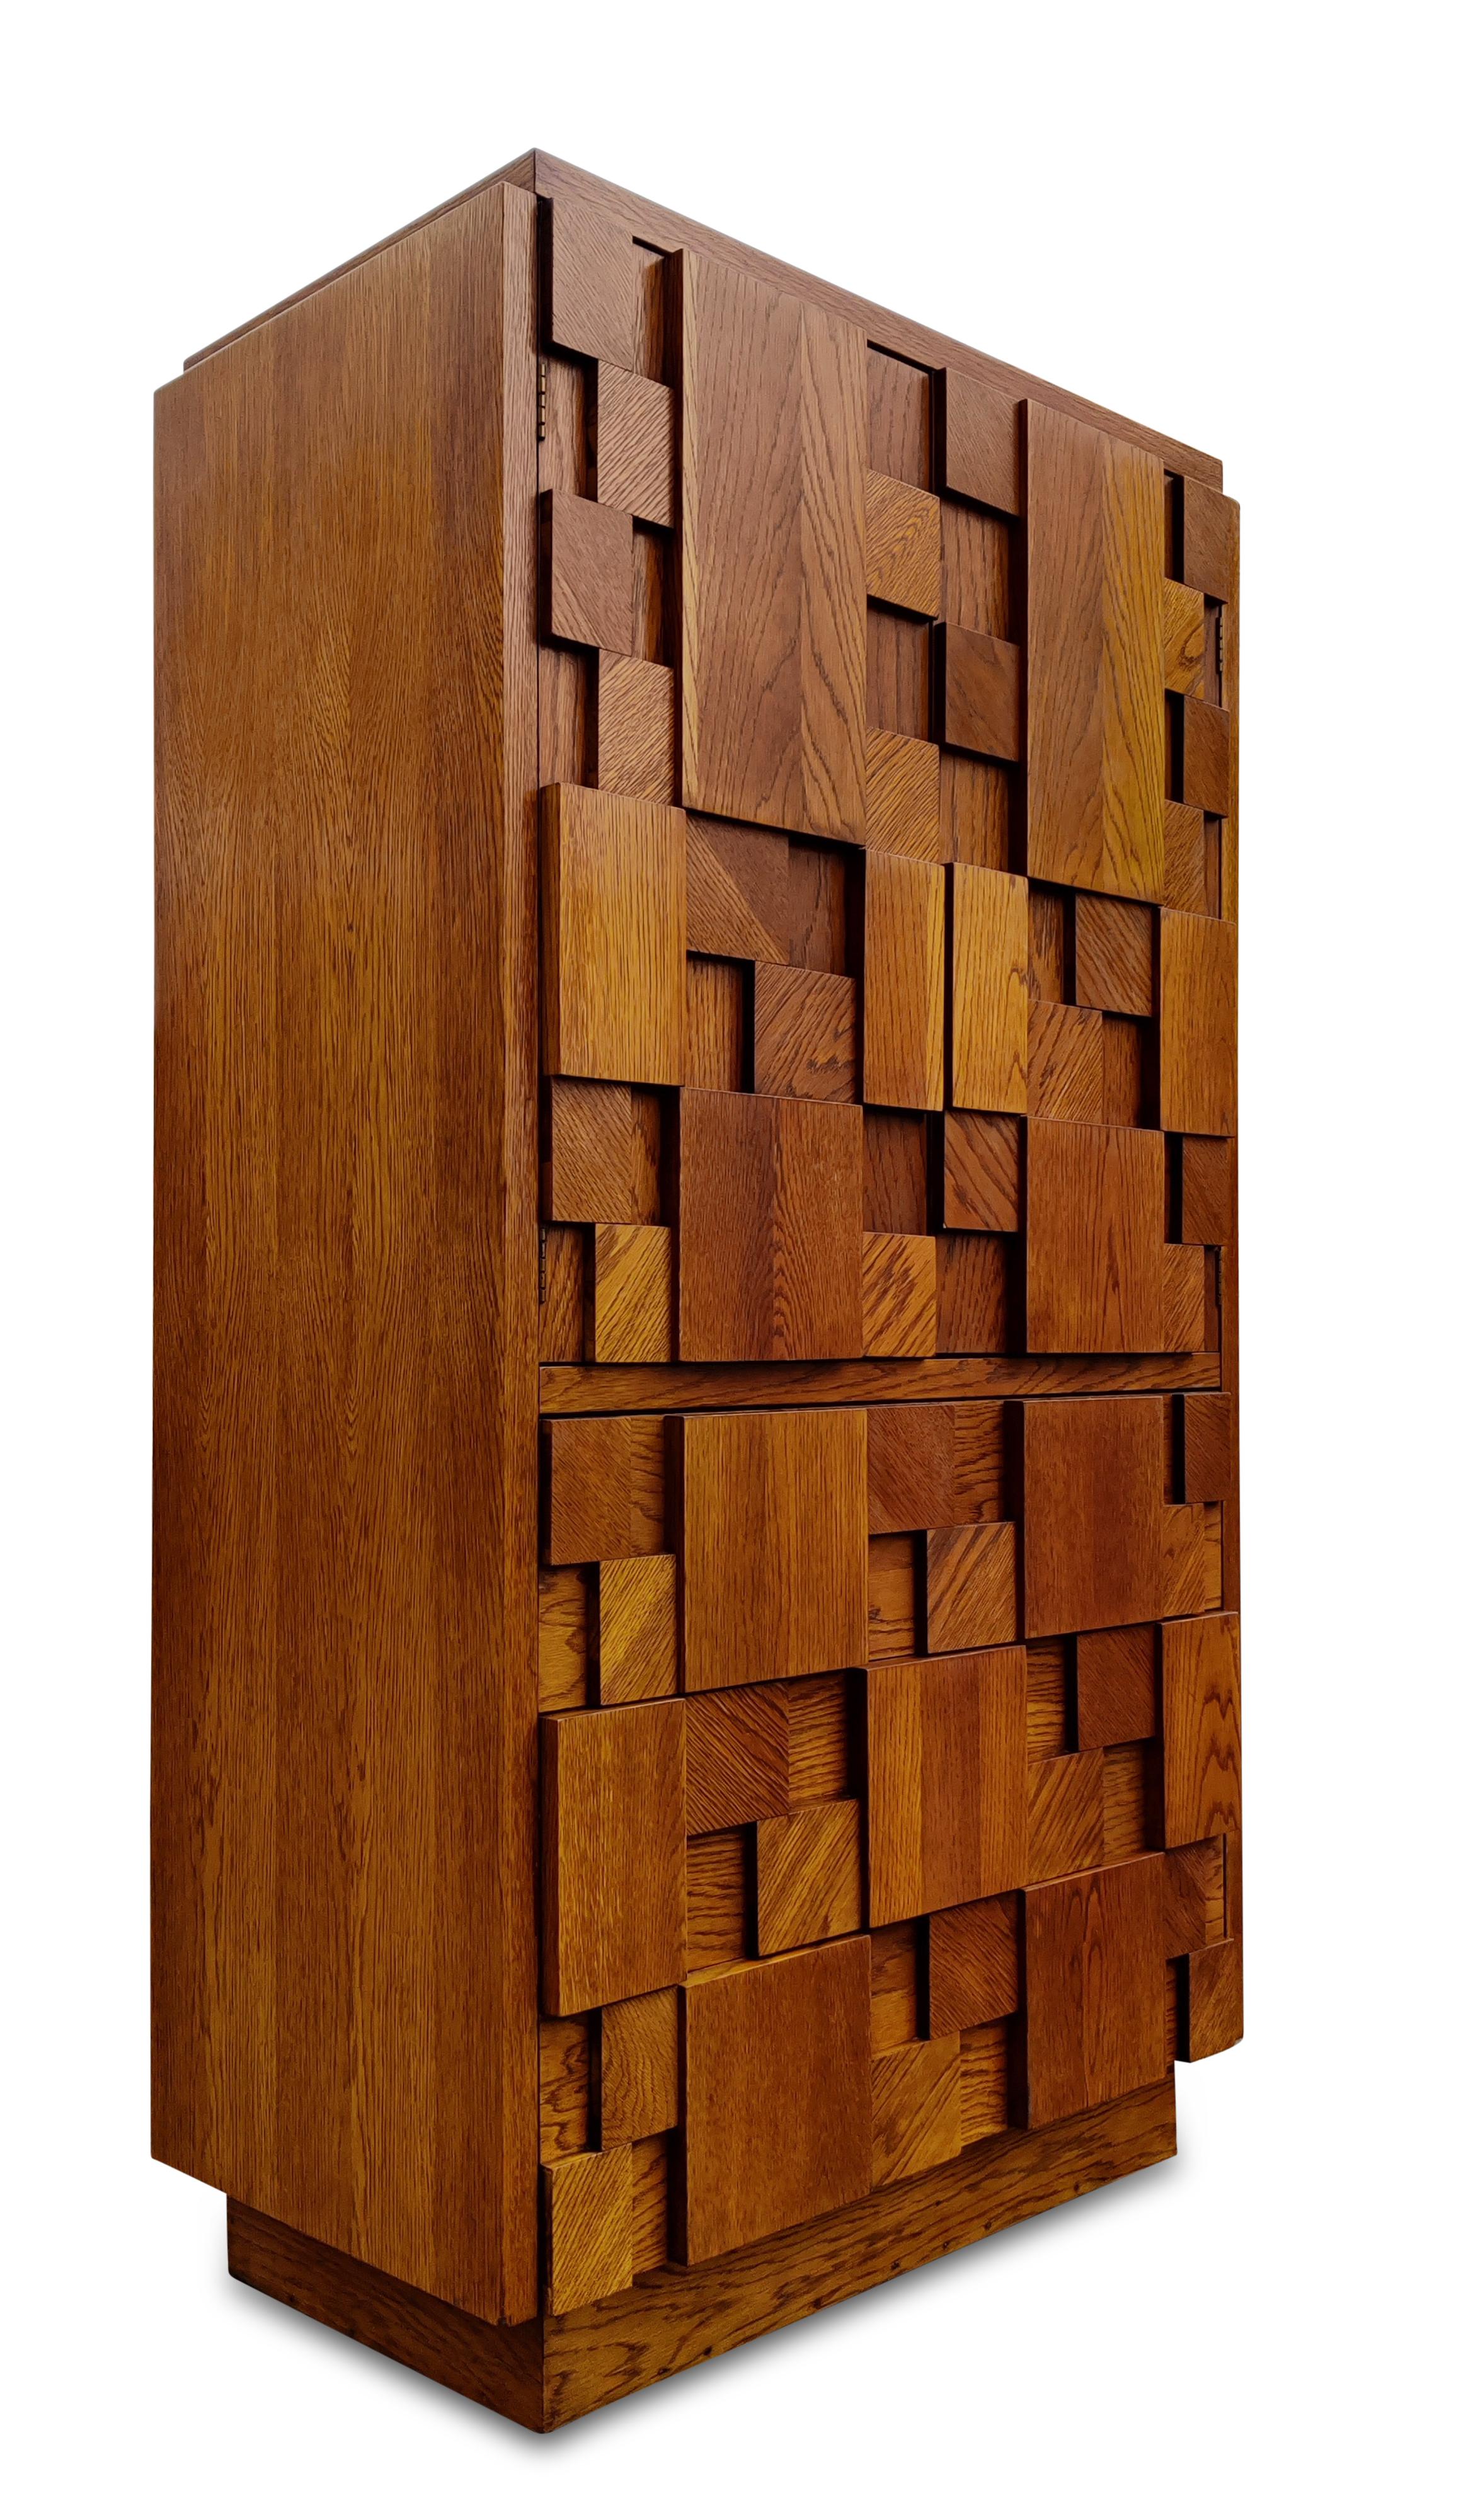 This tall chest was designed in the brutalist style made iconic by Paul Evans, and manufactured by Lane USA, circa 1970s. Made with varied blocks of oak attached to the front, it lends an imposing and dramatic look while retaining the rich color and